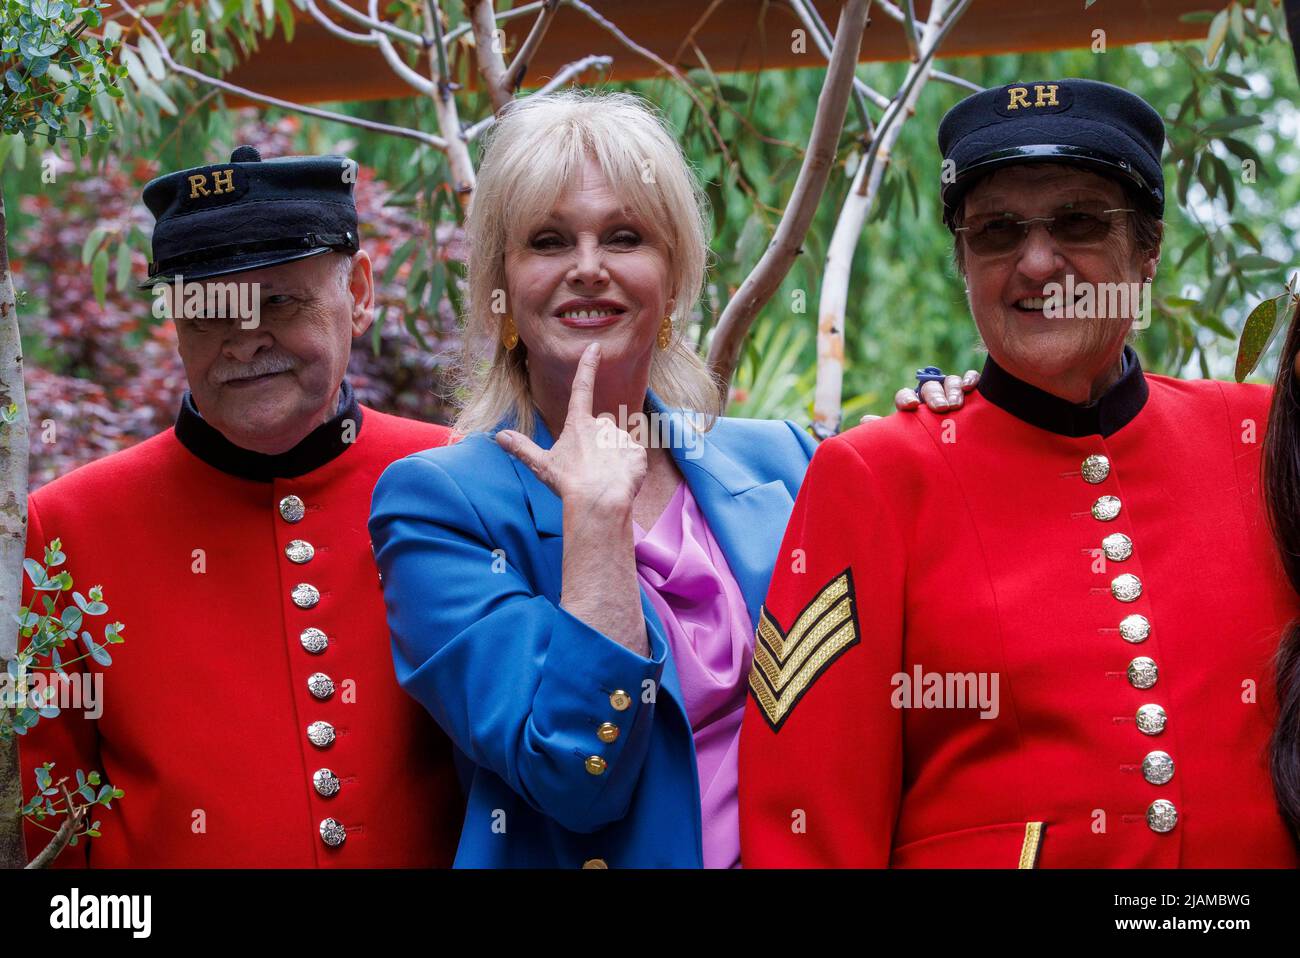 Dame Joanna Lumley, actress model and activist, at the RHS Chelsea Flower Show. She is a National Treasure. Stock Photo